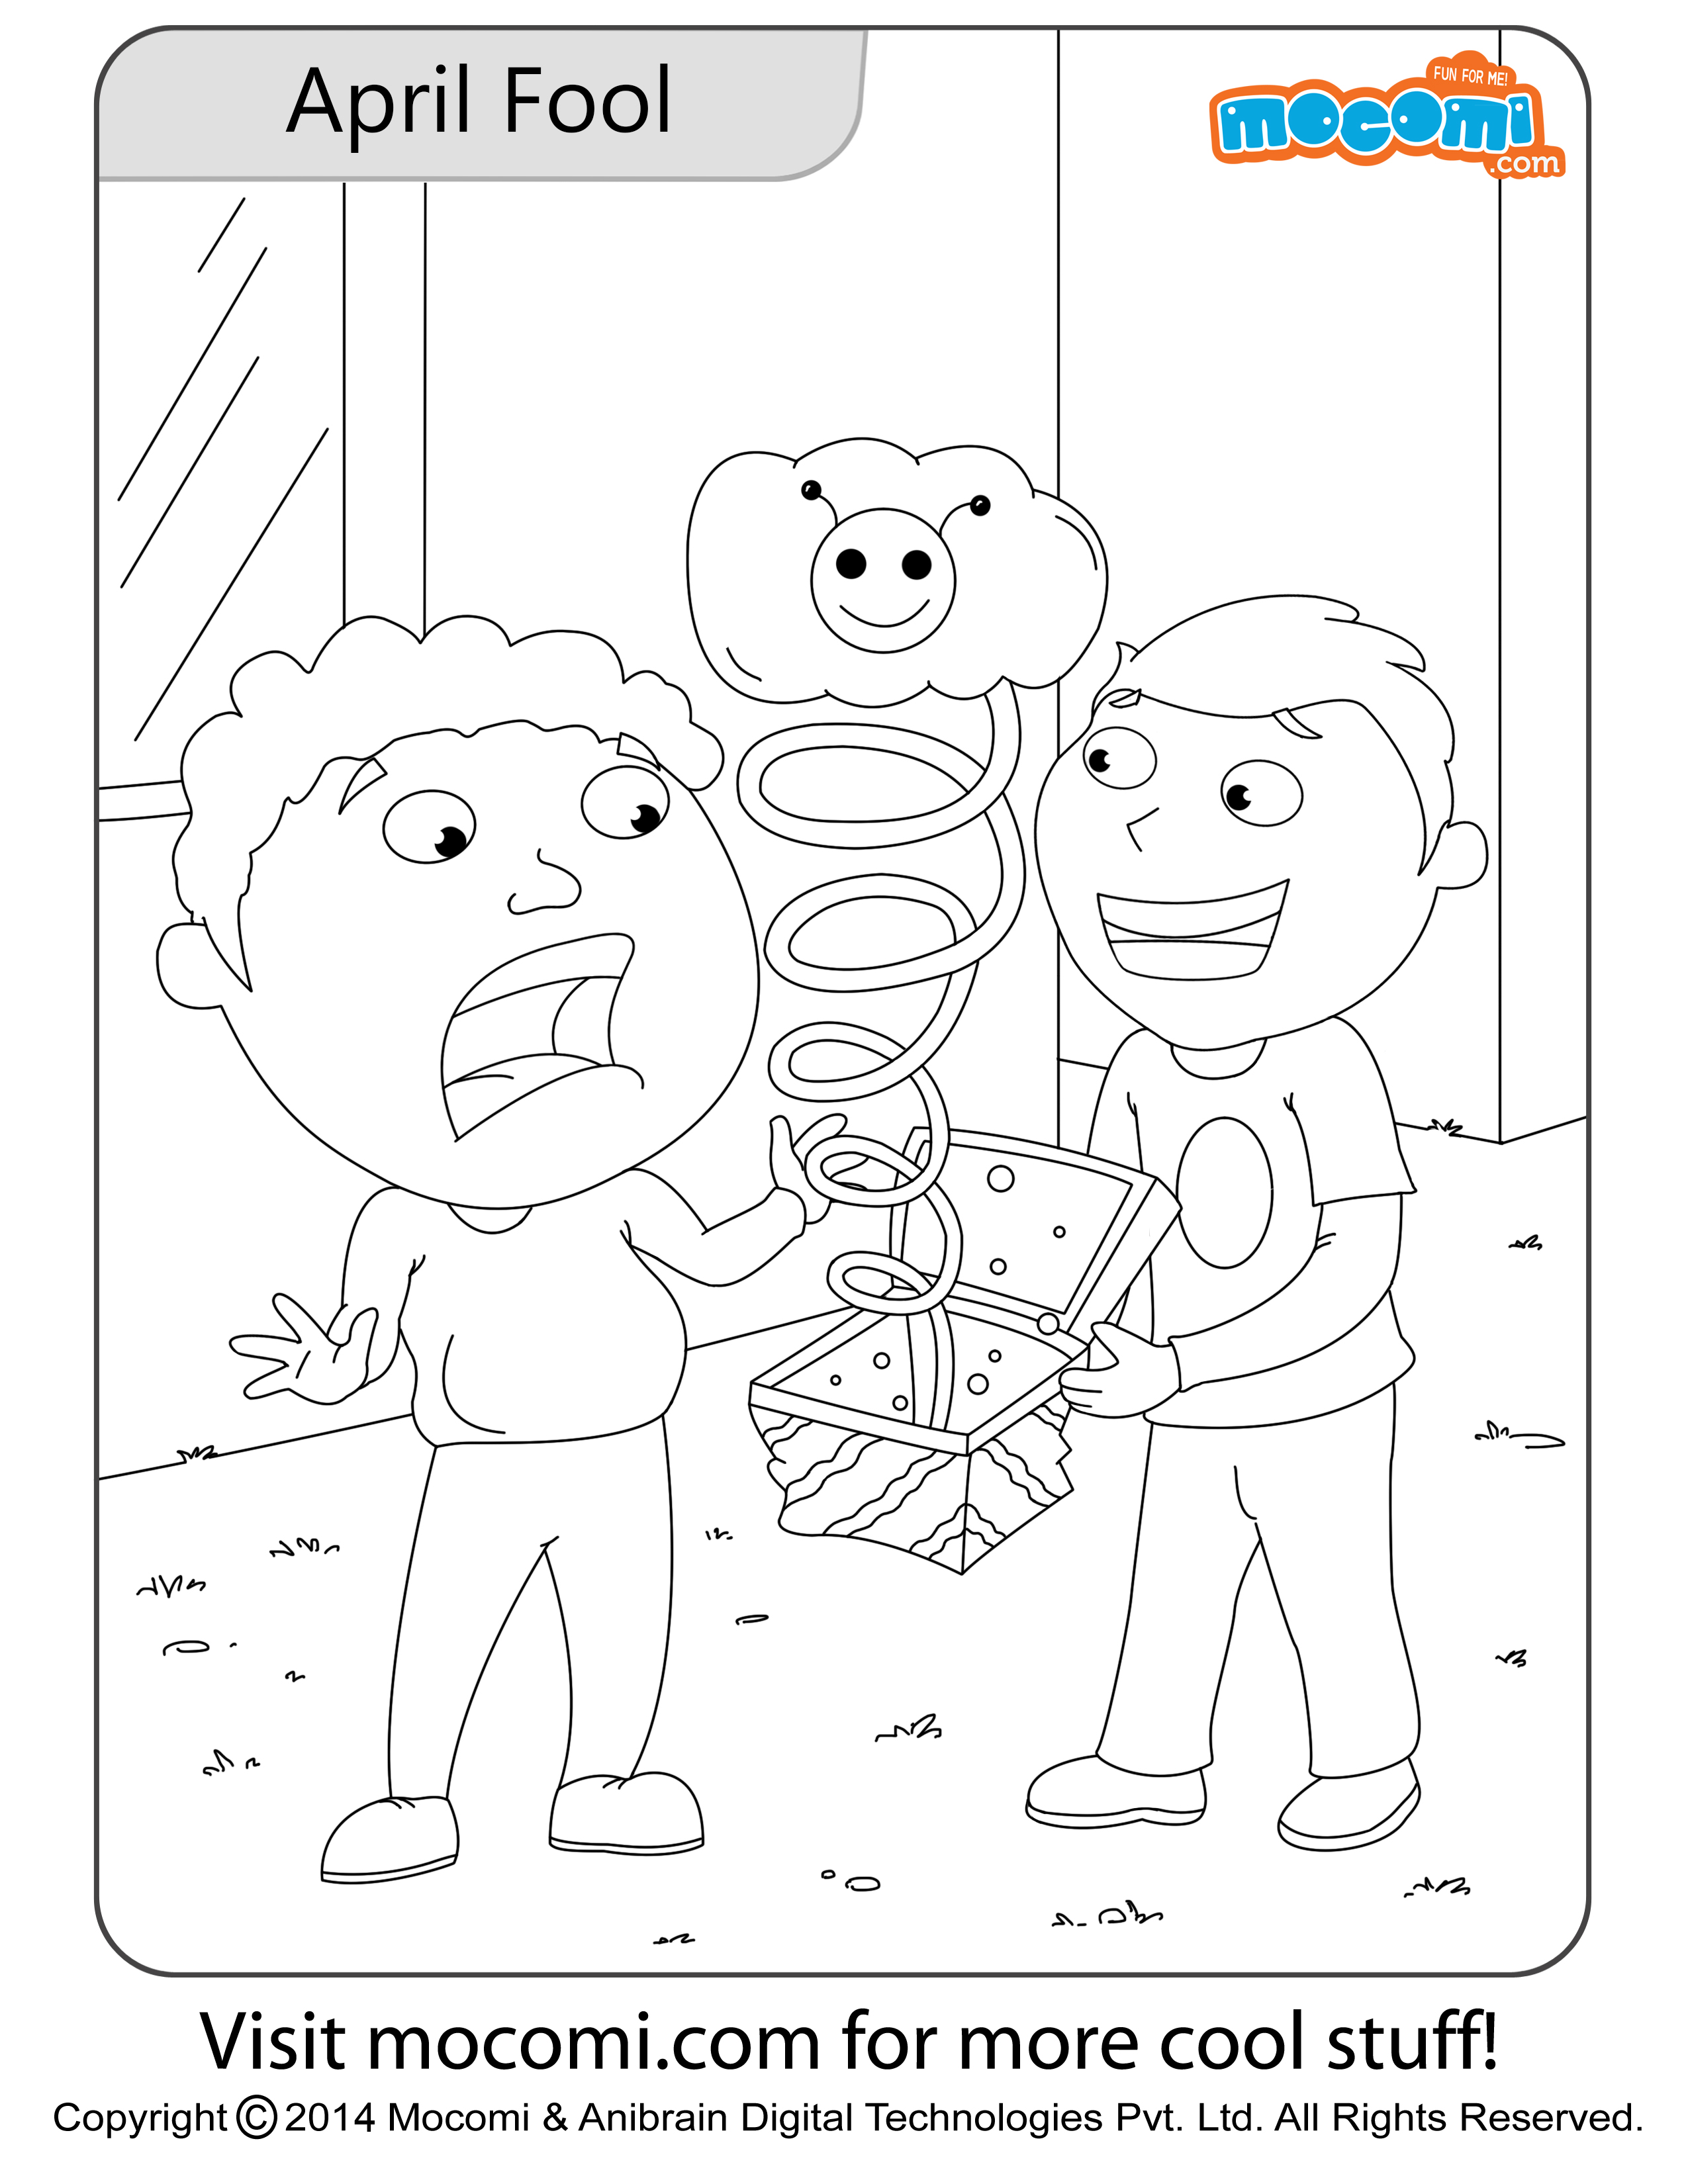 April Fool - Jojo - Colouring Pages for Kids | Mocomi